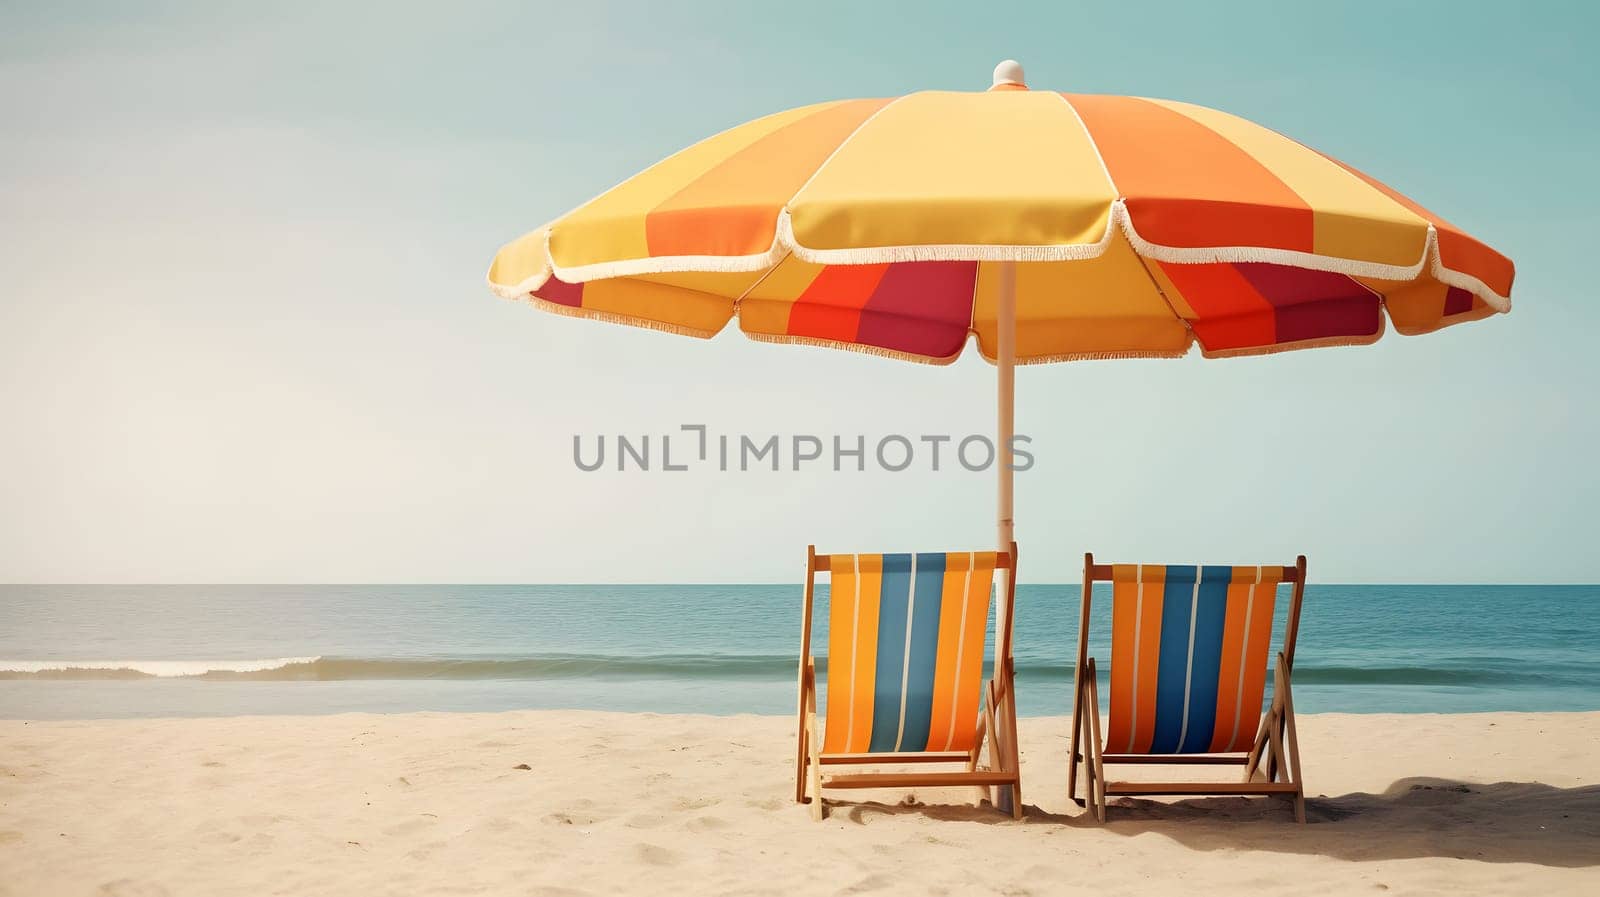 Beach umbrella with two chairs on the sand beach - summer vacation theme header, neural network generated art by z1b